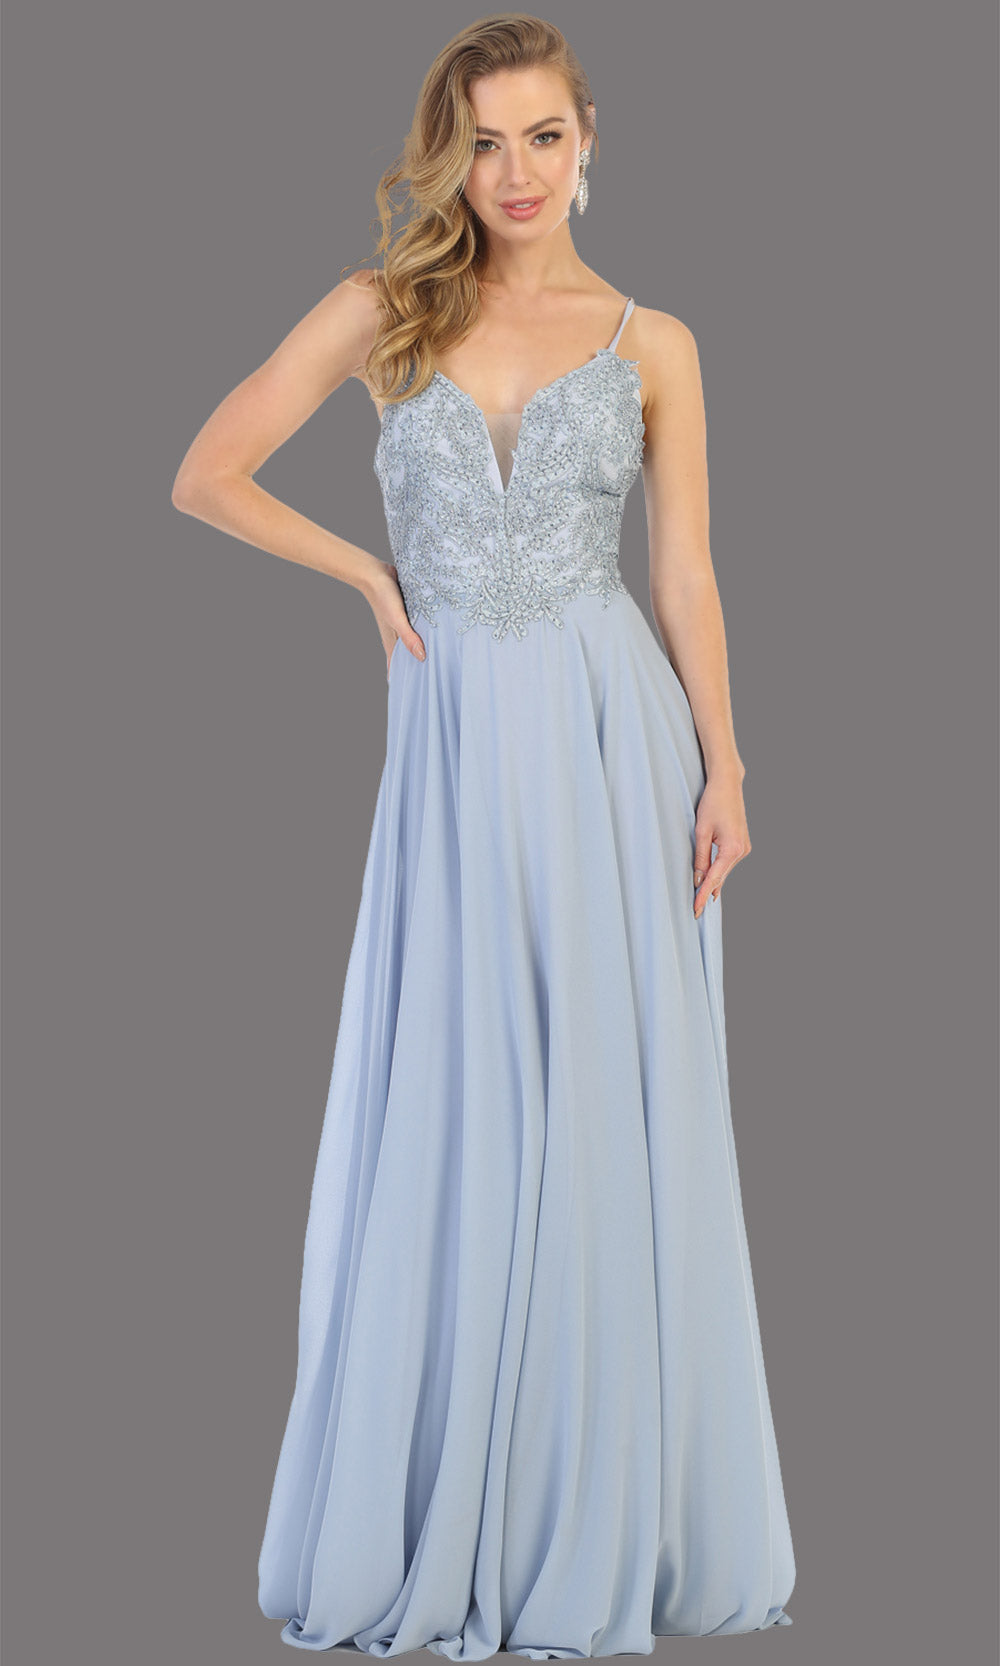 Mayqueen MQ1750 long dusty blue flowy sleek & sexy dress w/straps. This dusty blue dress is perfect for bridesmaid dresses, simple wedding guest dress, prom dress, gala, black tie wedding. Plus sizes are available, evening party dress.jpg